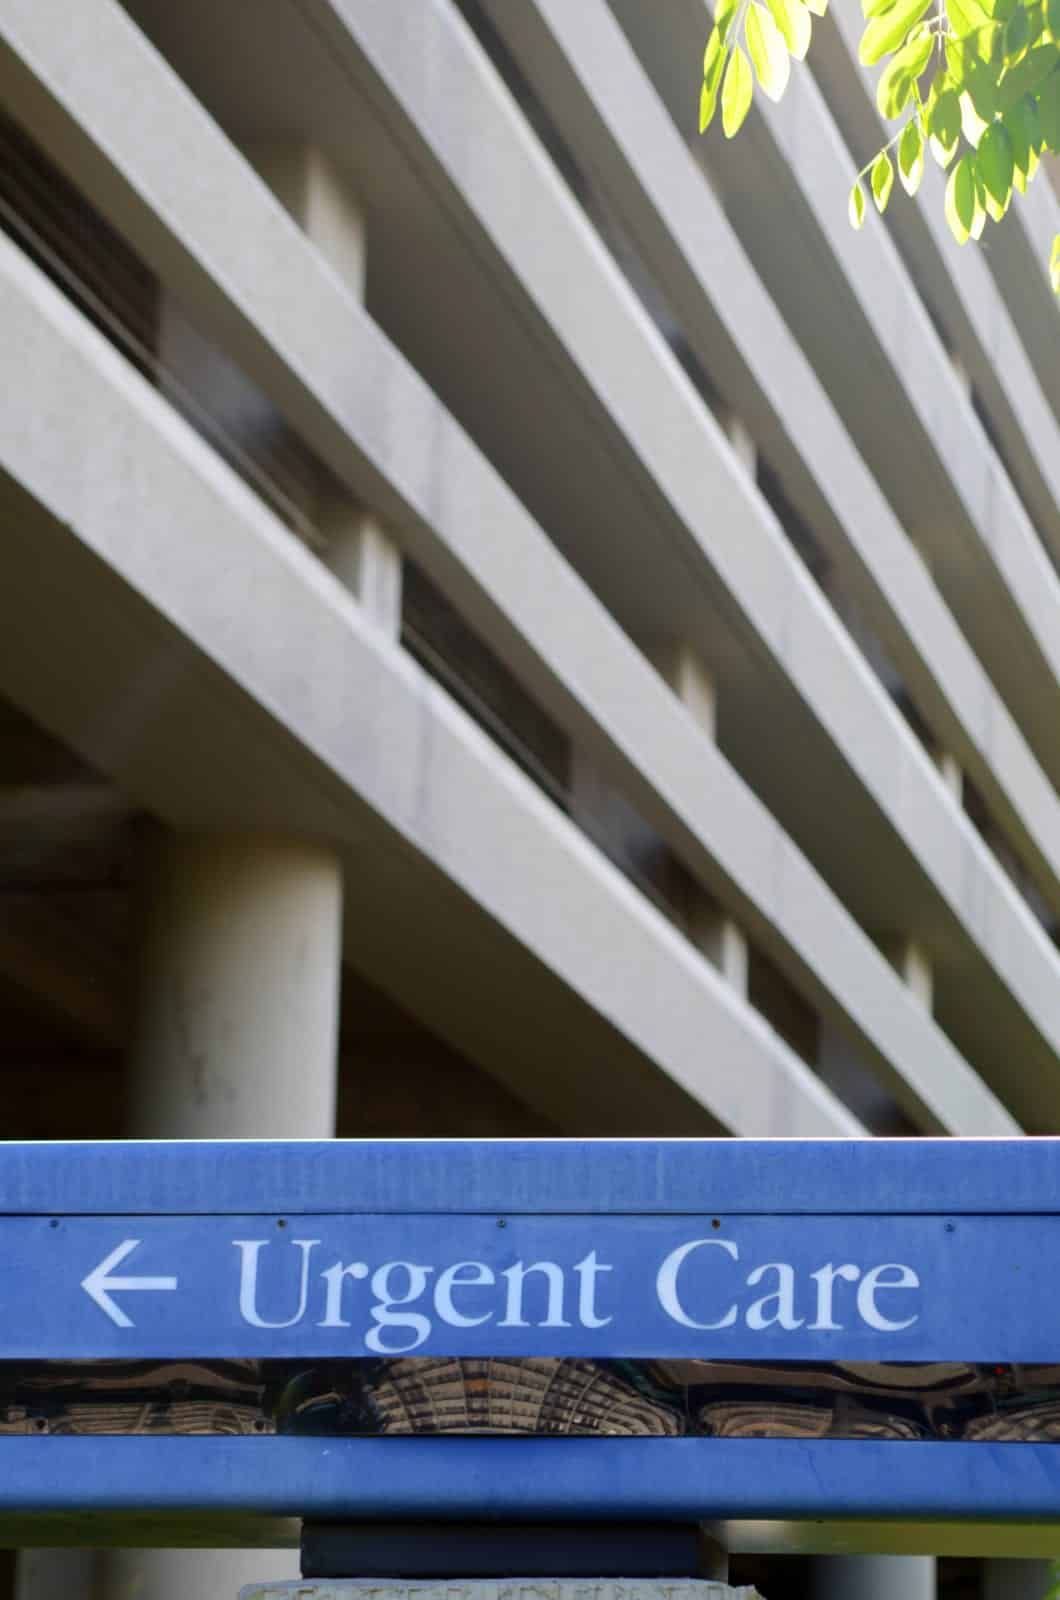 does Medicare cover urgent care services?